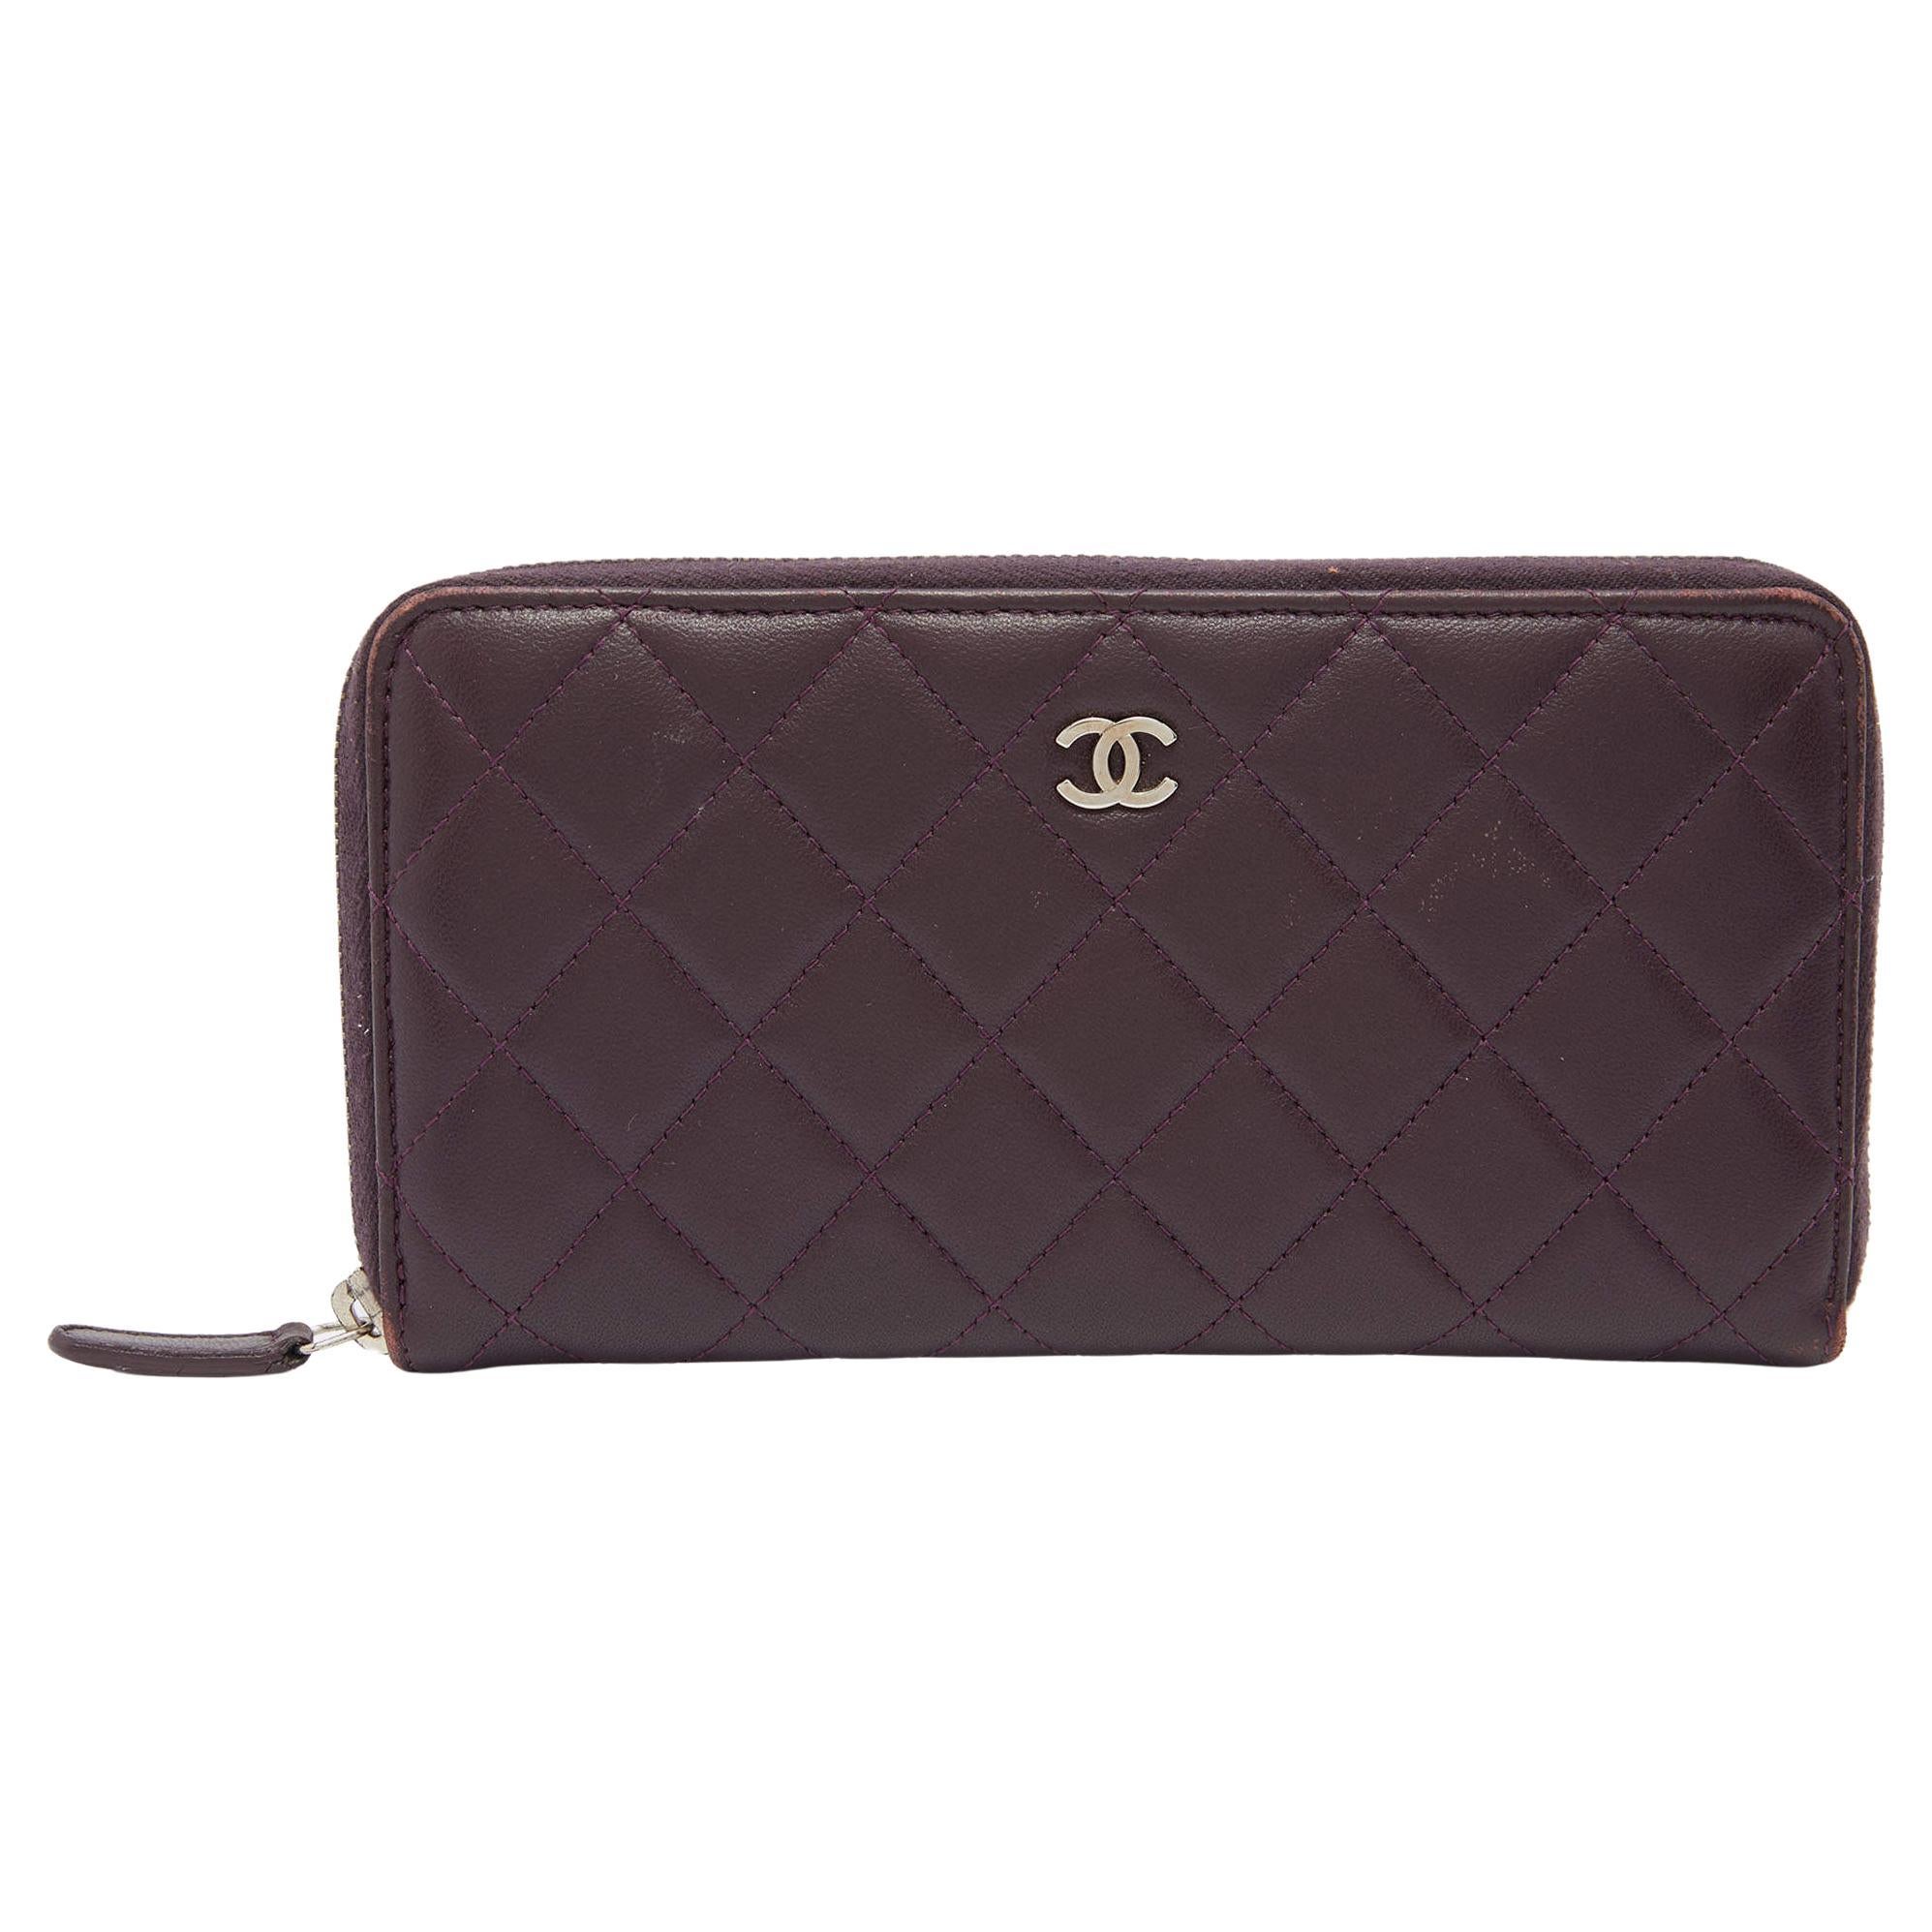 Chanel Purple Quilted Leather CC Zip Around Wallet For Sale